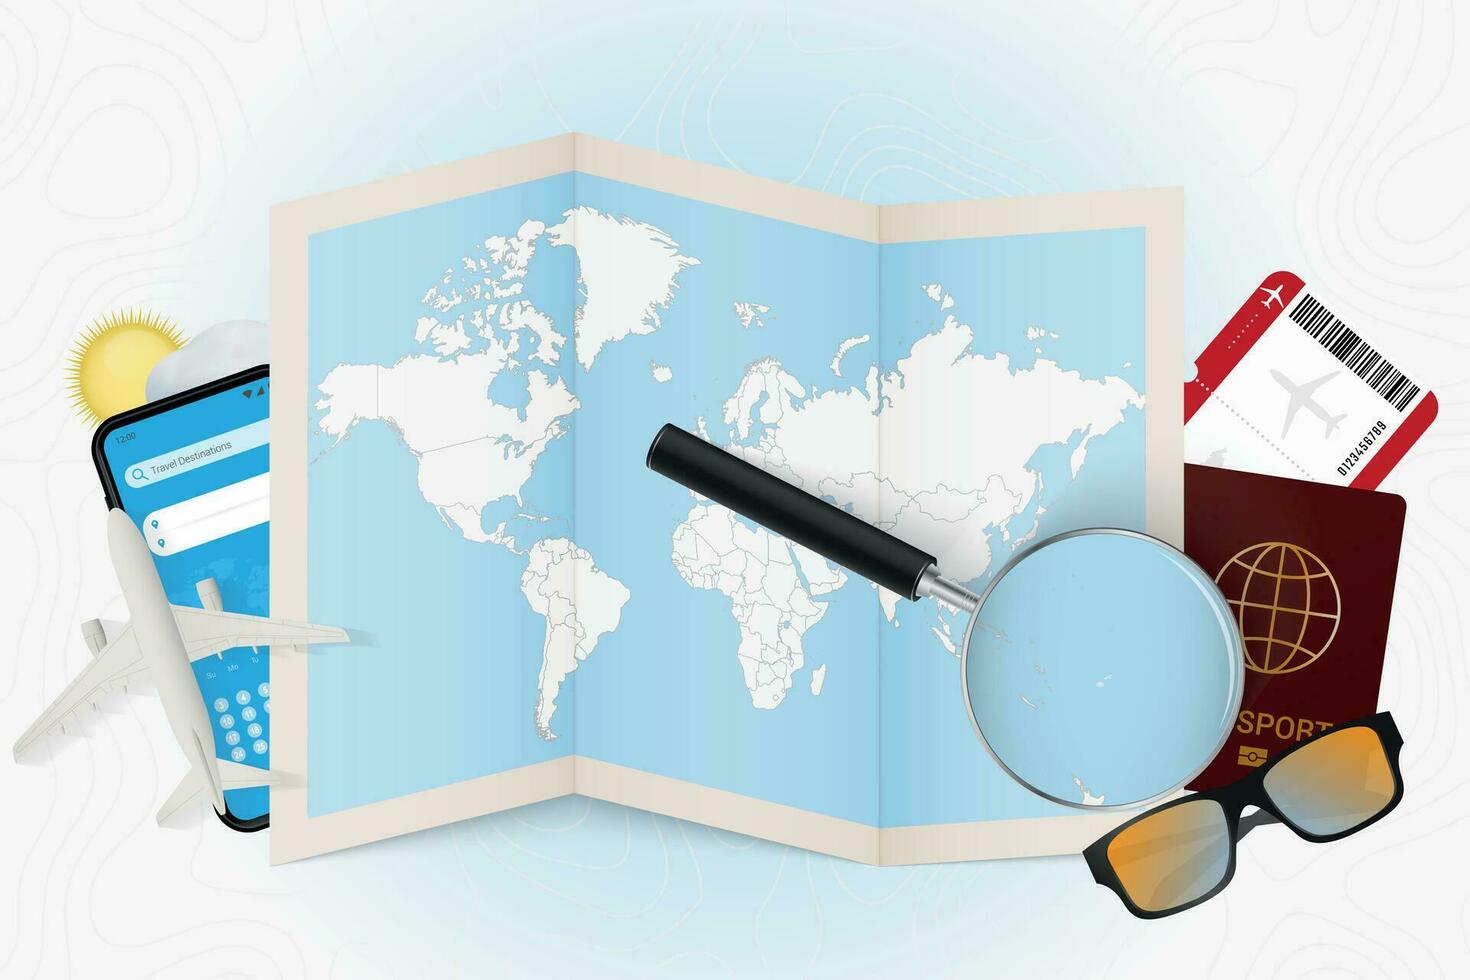 Travel destination Fiji, tourism mockup with travel equipment and world map with magnifying glass on a Fiji. vector